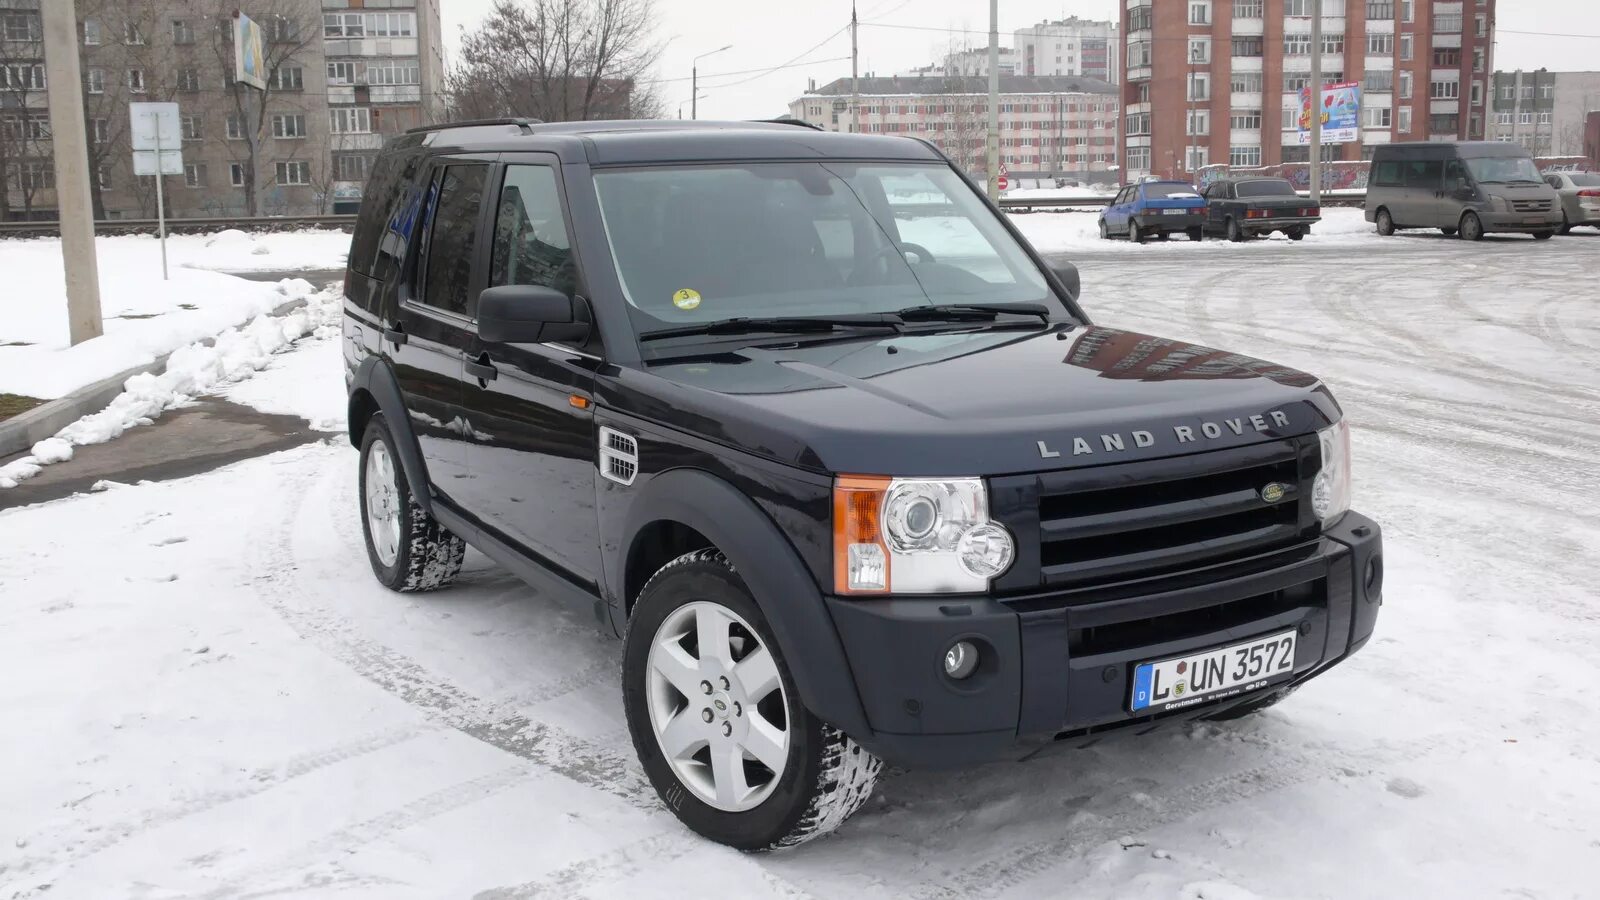 Land Rover Discovery 3. Ленд Ровер Дискавери 2007. Land Rover Discovery 3 HSE. Ленд Ровер Дискавери 2004. Кузов дискавери 3